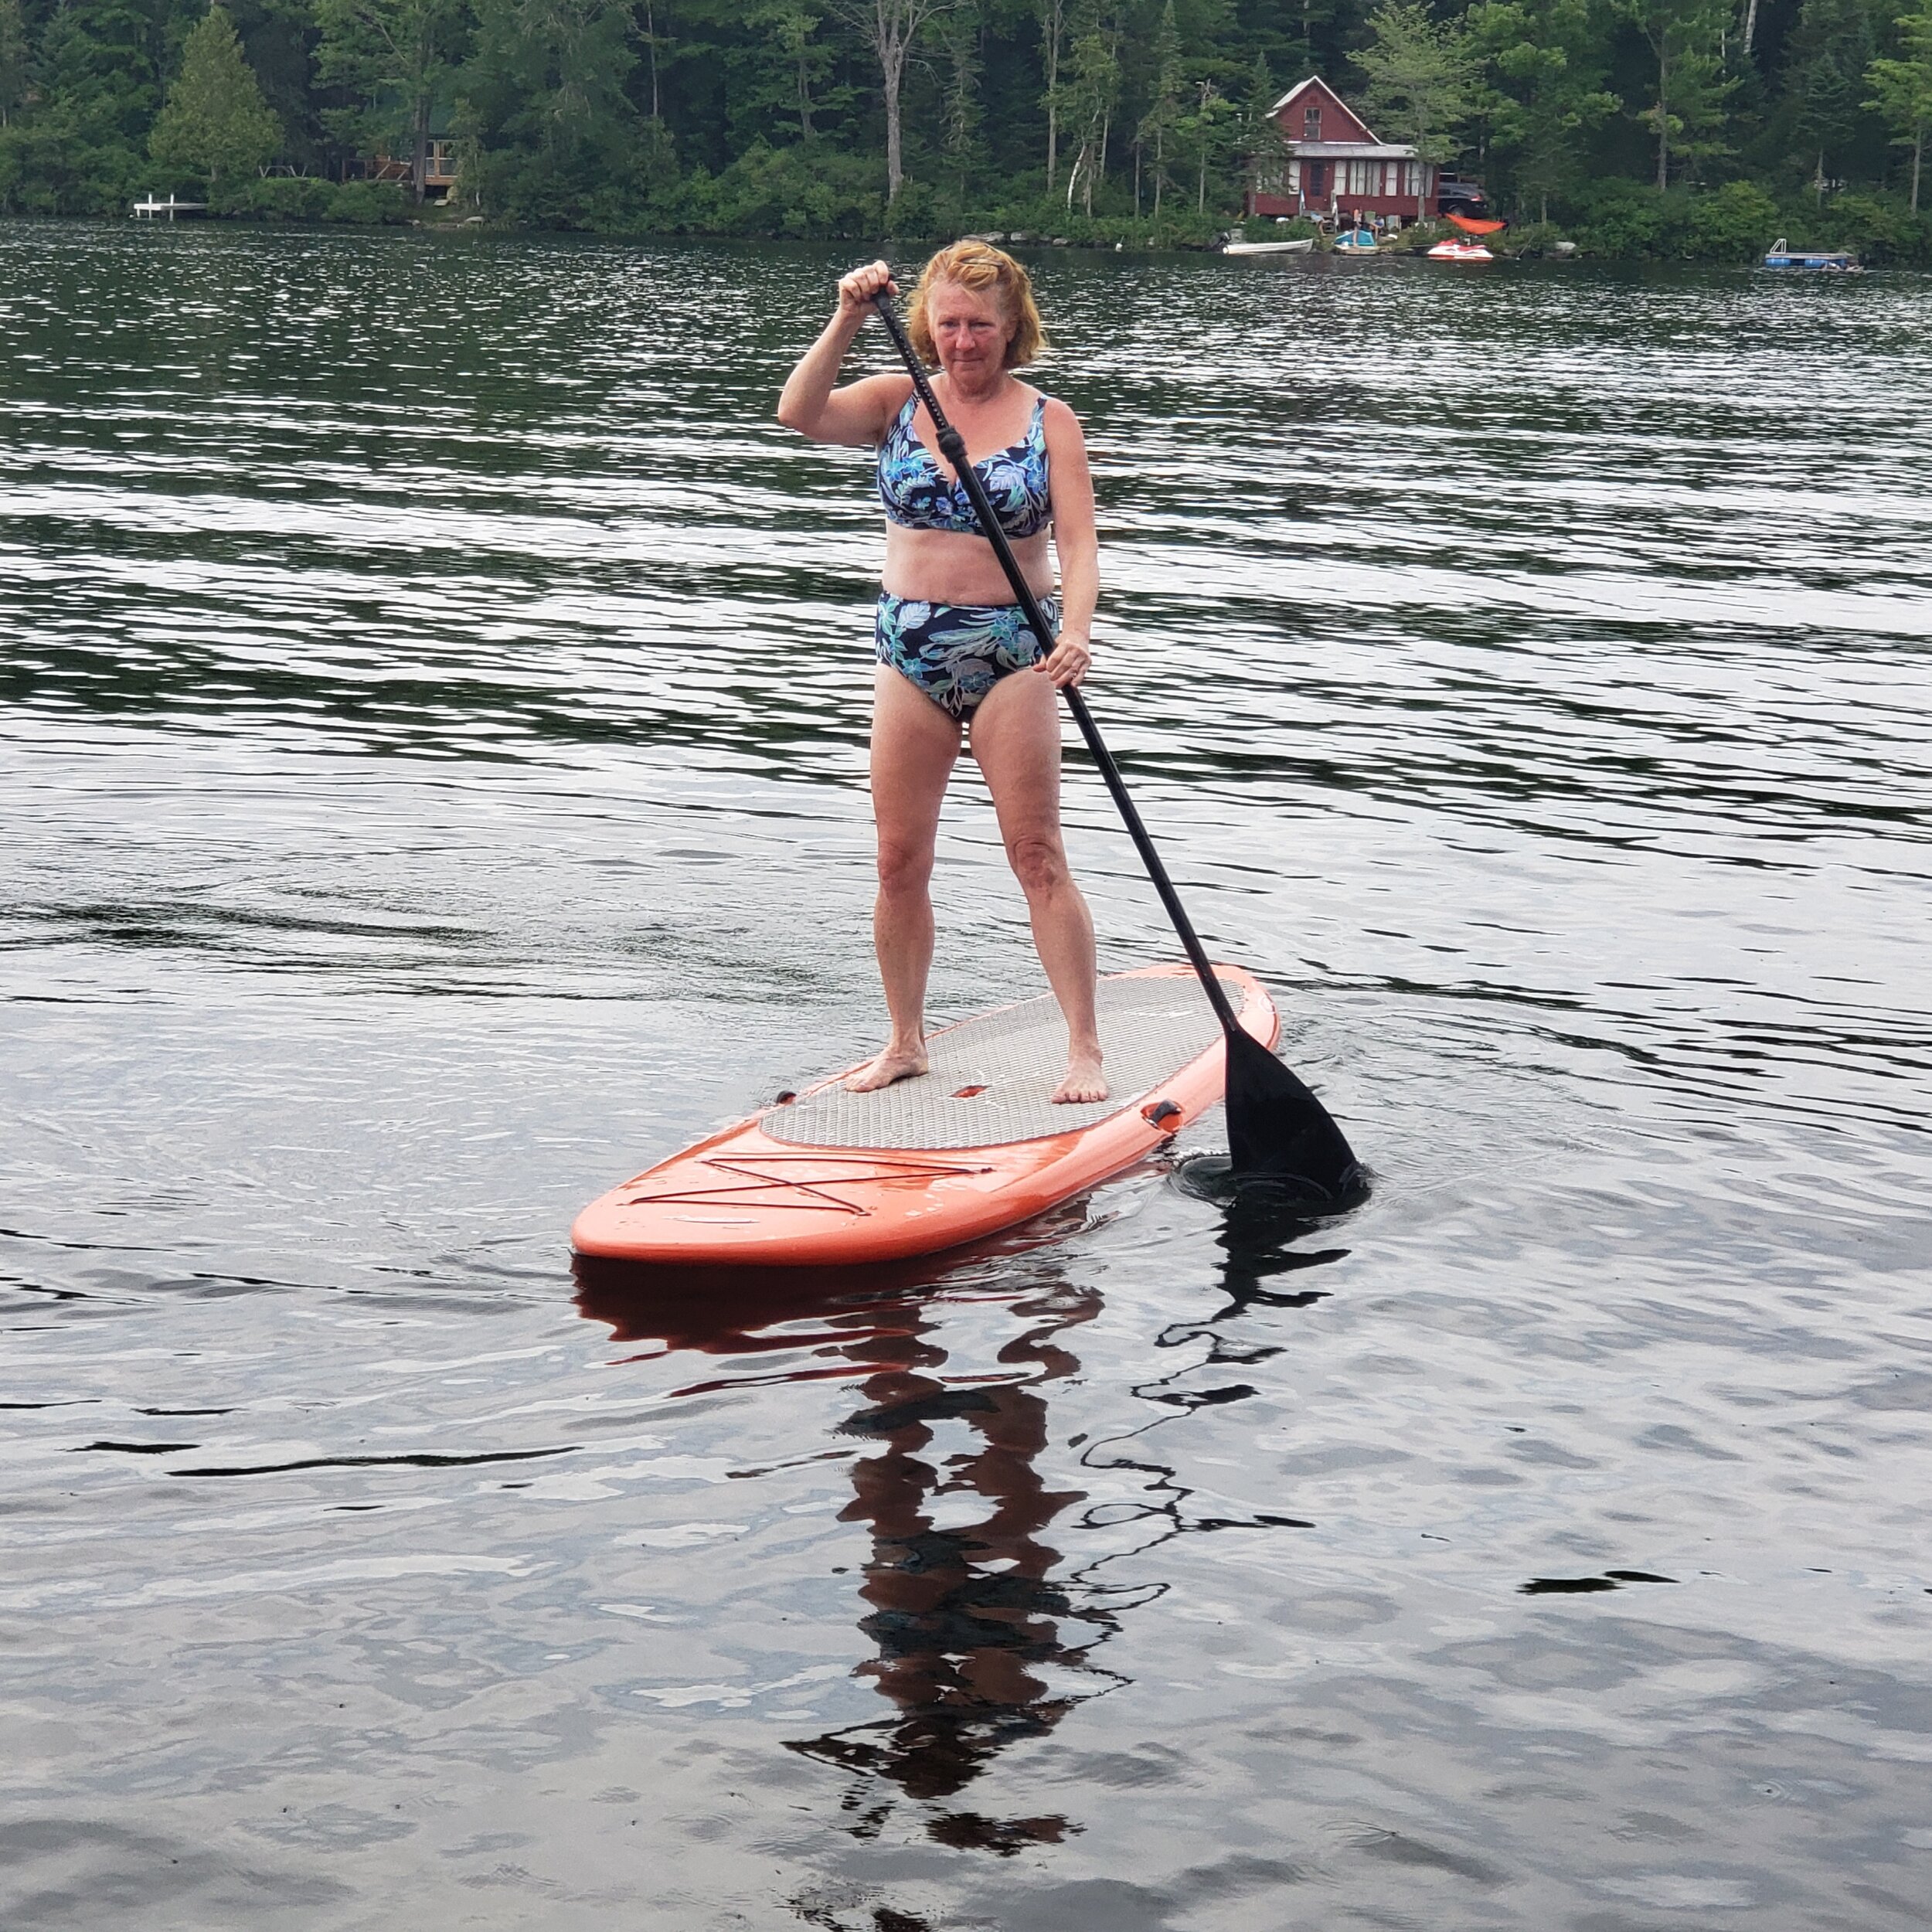 Photo of Annemarie paddle-boarding. She is wearing a blue swimsuit.